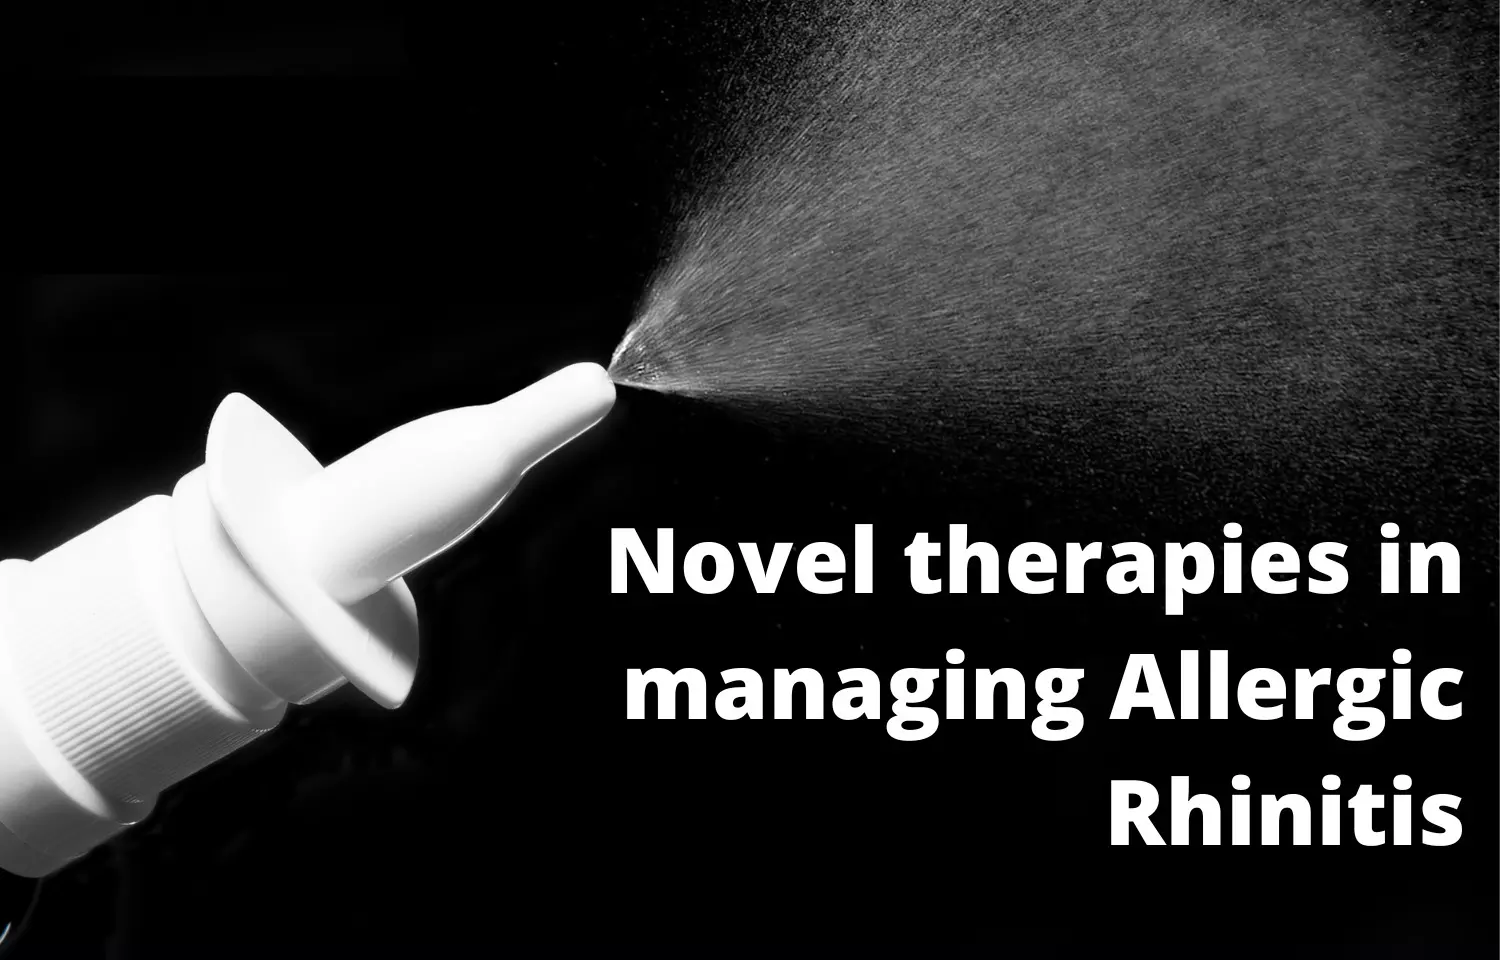 Novel therapies in managing Allergic rhinitis: How far have we come?